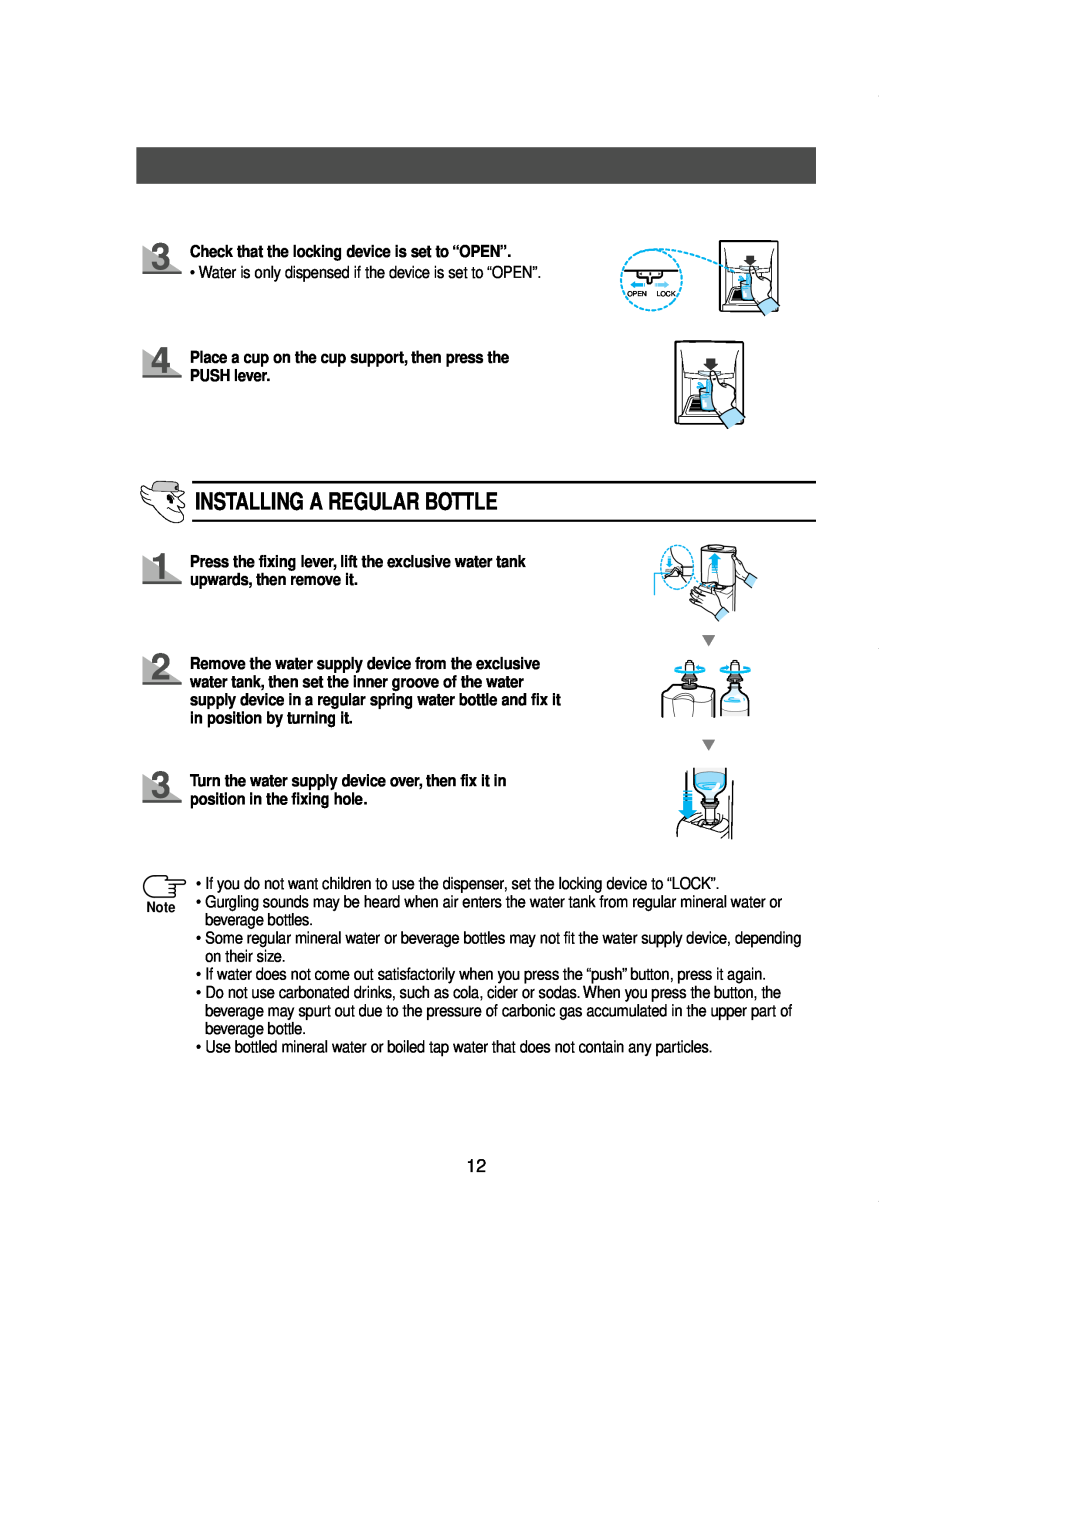 Samsung SR-L36 manual Installing A Regular Bottle, Check that the locking device is set to “OPEN”, upwards, then remove it 